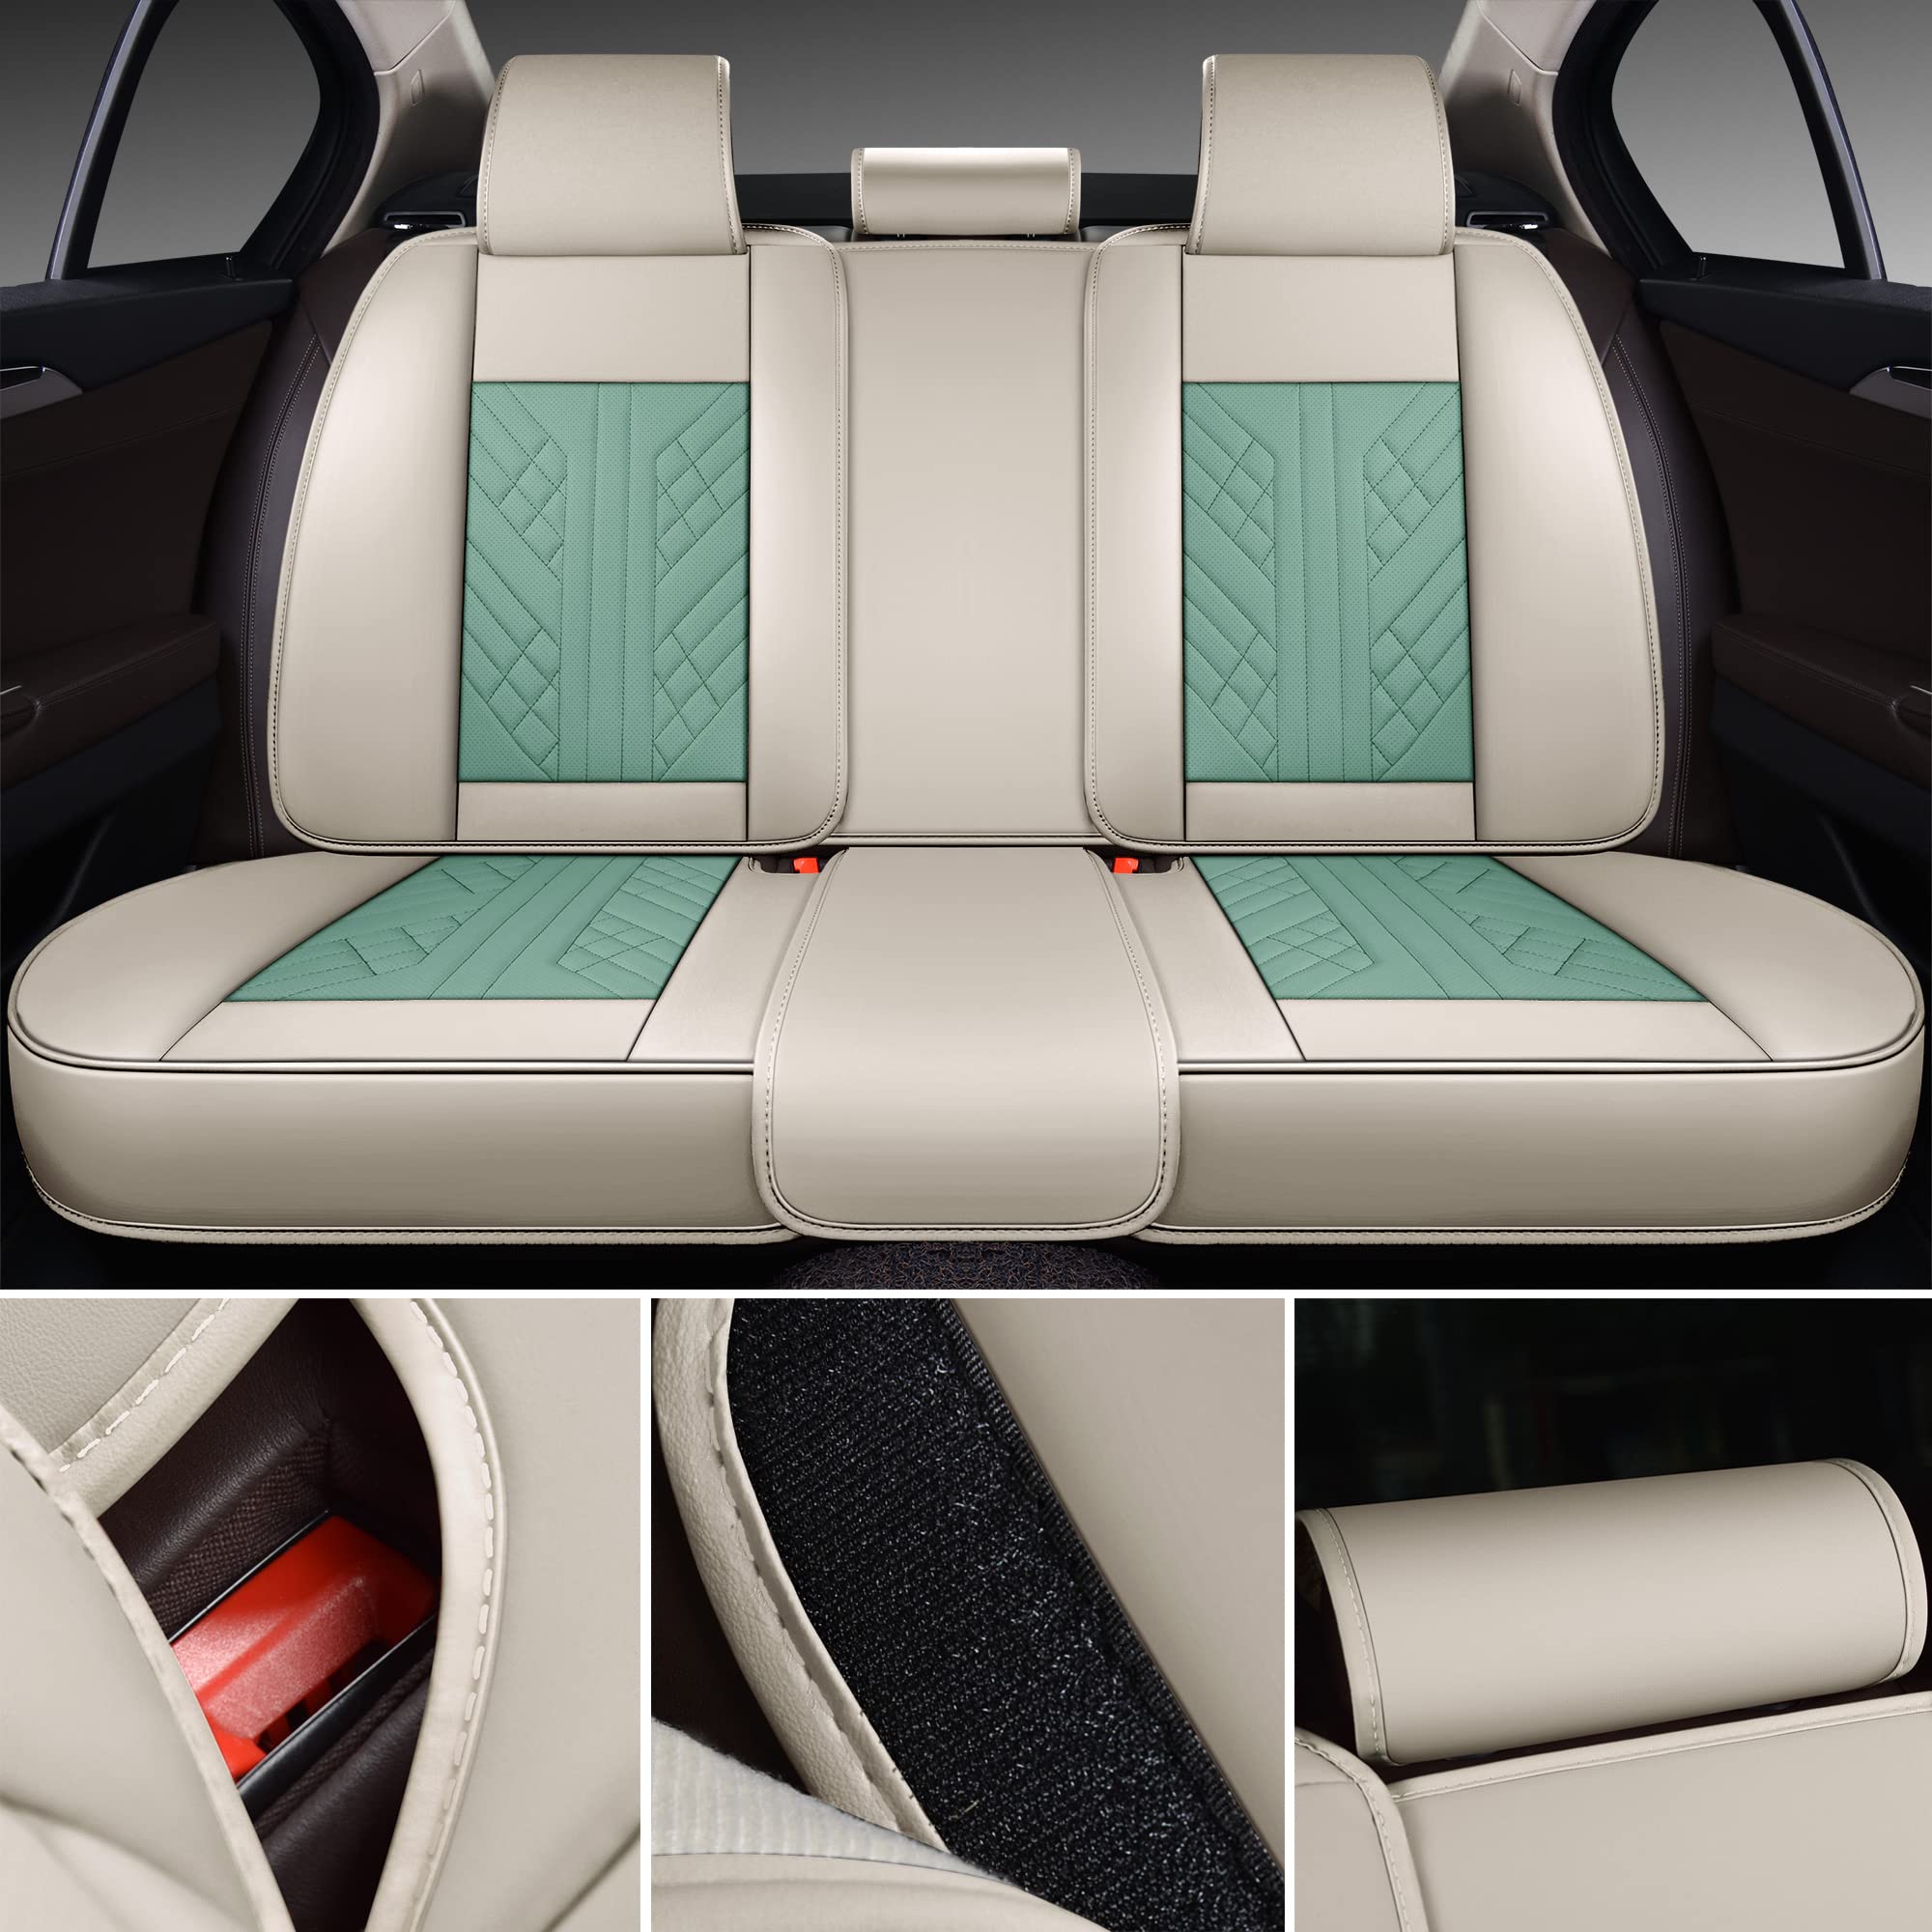 GXT Deluxe Faux Leather Full Coverage Car Seat Cover Anti-Slip Universal Fits for Sedans SUV Pick-up Truck with Headrests,Interior Accessories, White & Mint Green